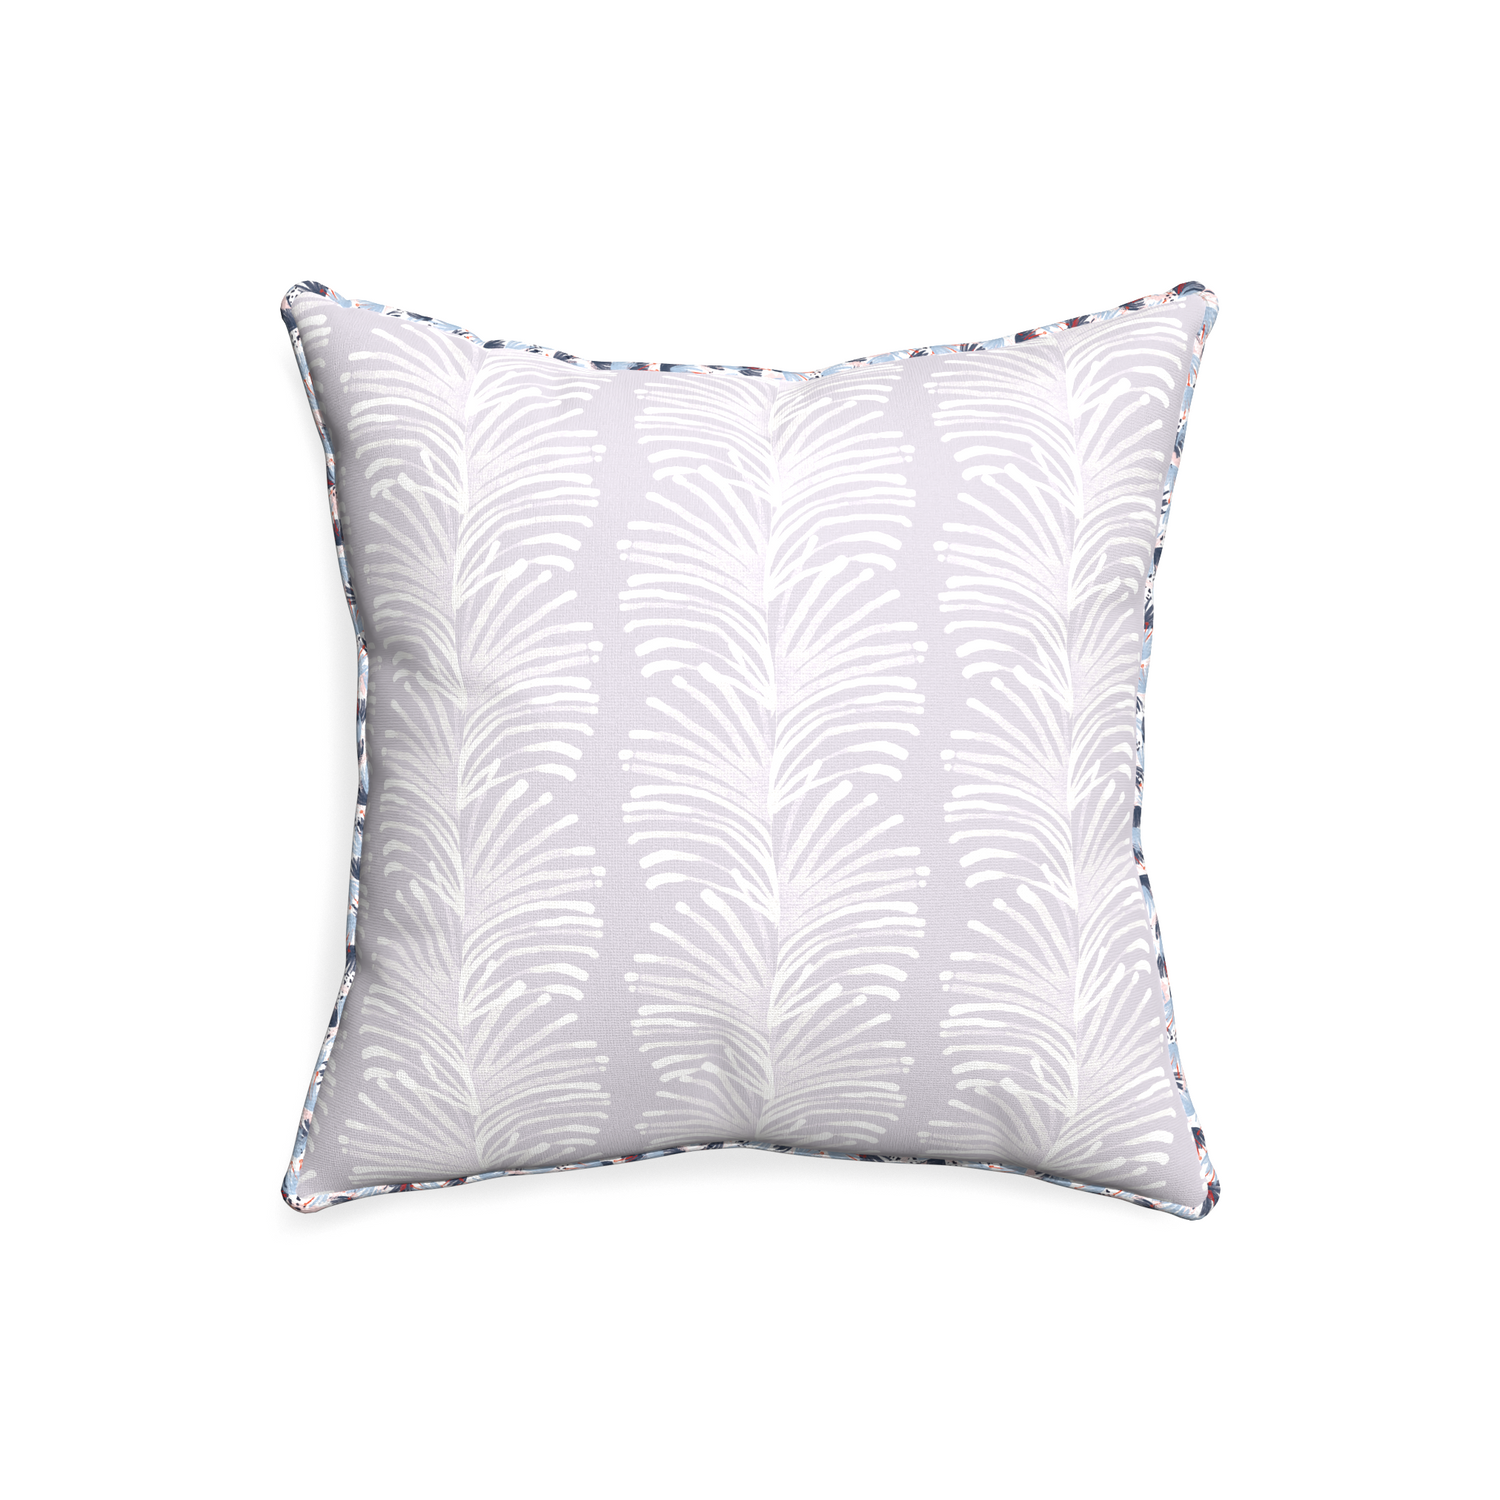 20-square emma lavender custom pillow with e piping on white background